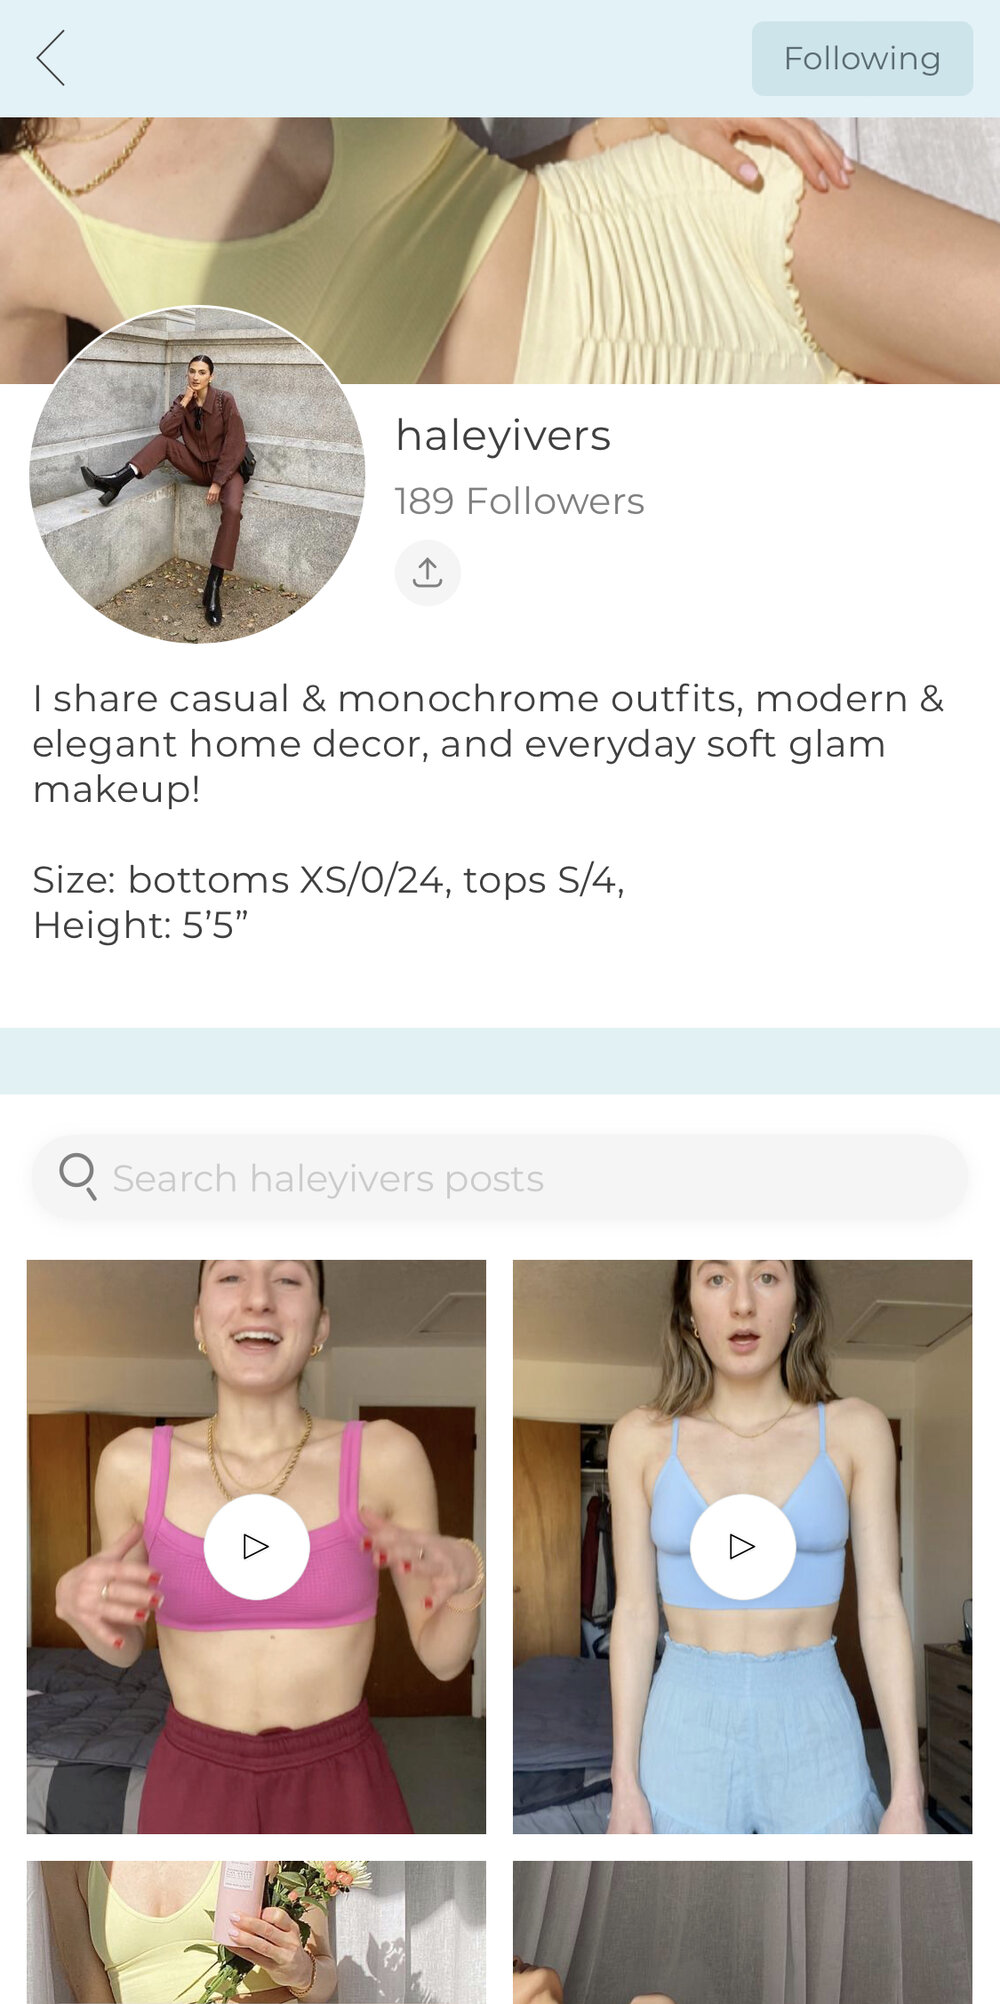 How to Use LIKEtoKNOW.it to Shop my Looks | Haley Ivers @haleyivers